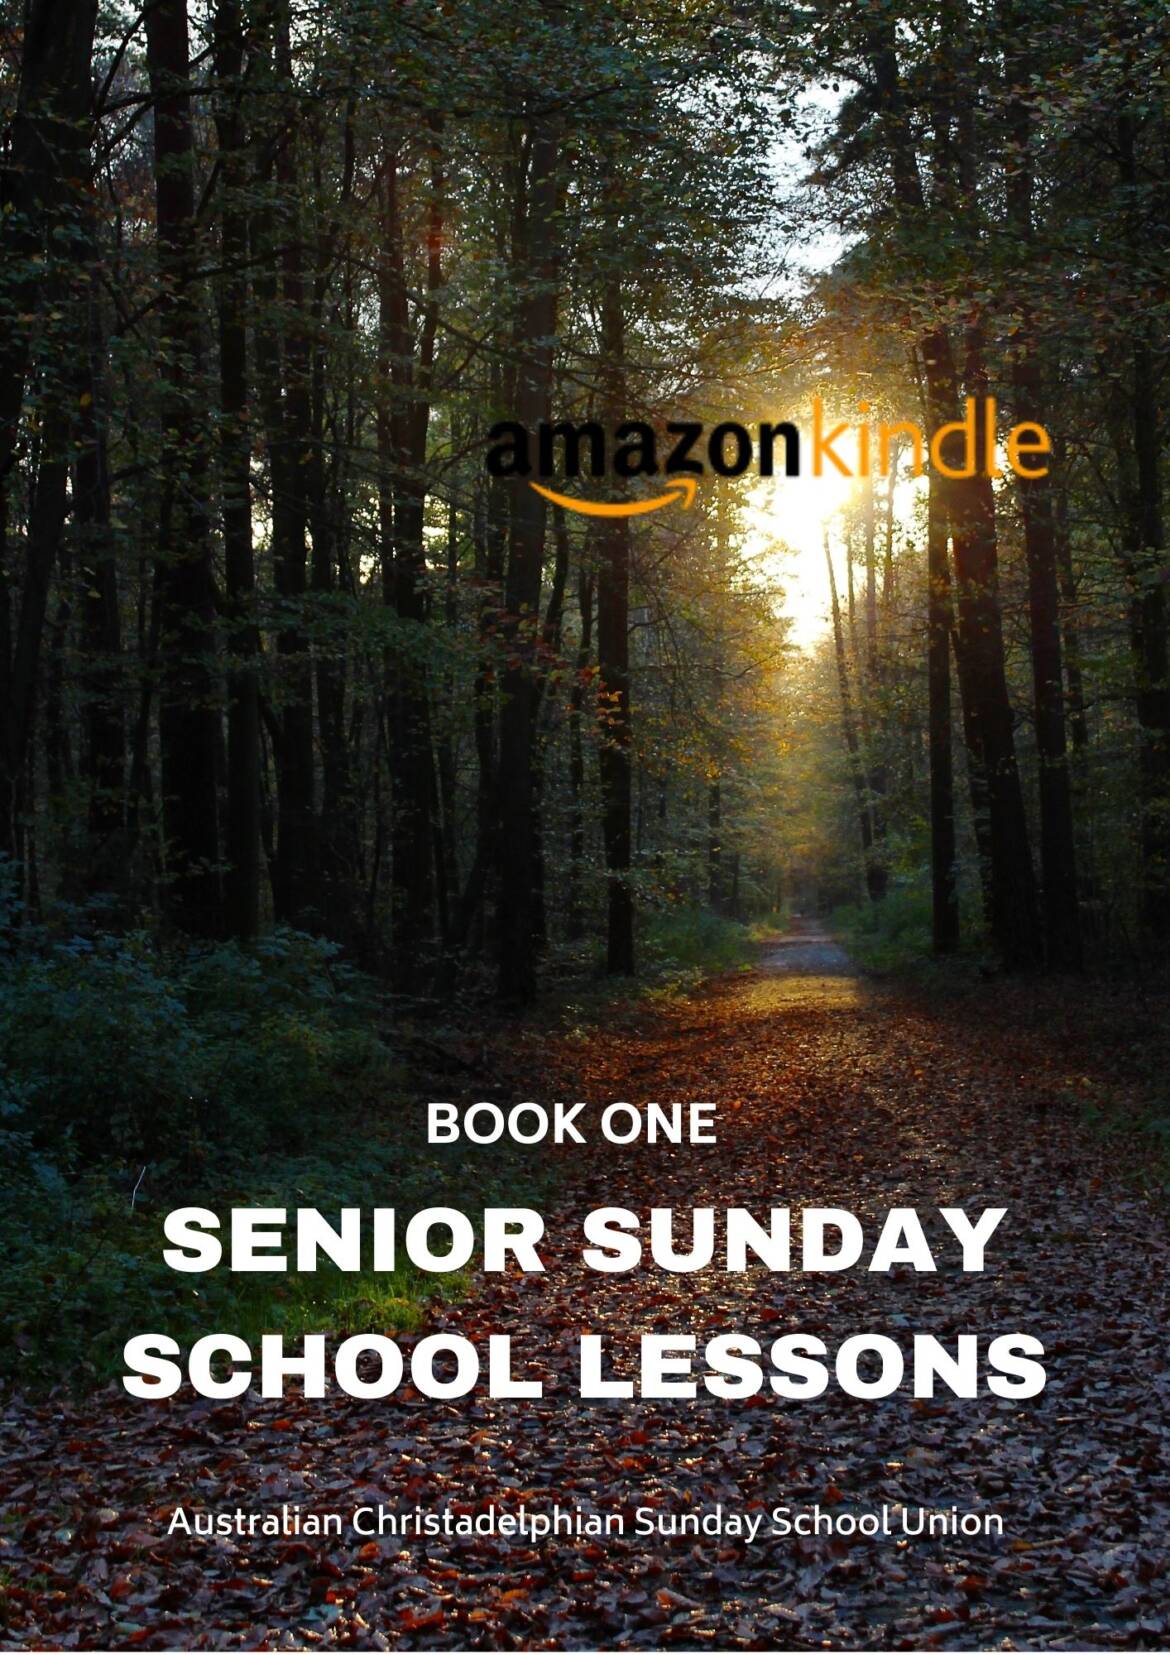 KINDLE-Cover-Senior-Sunday-School-Lessons-Year-One.jpg